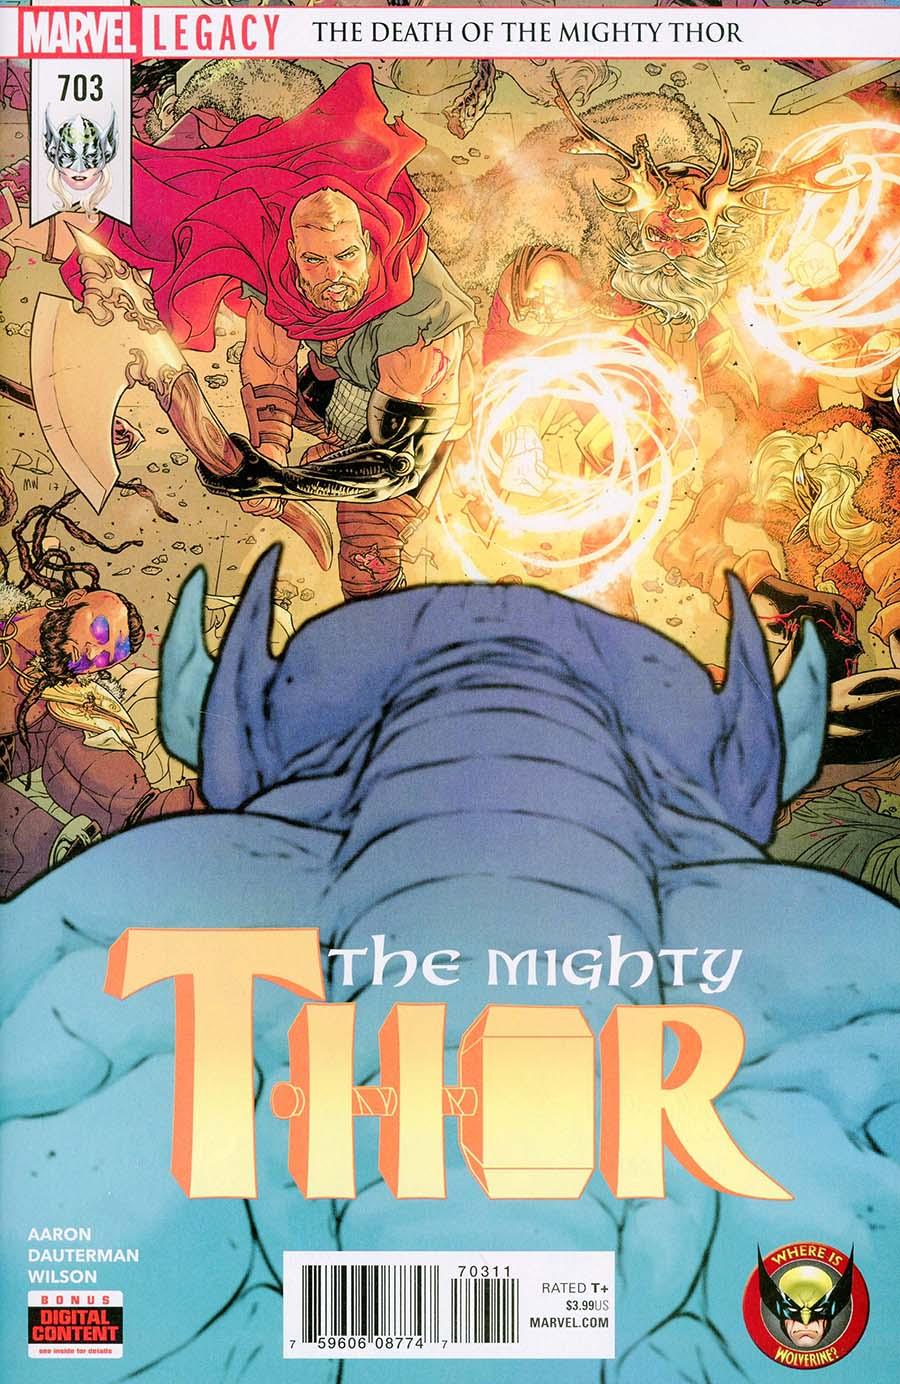 The Mighty Thor Vol. 2 #703